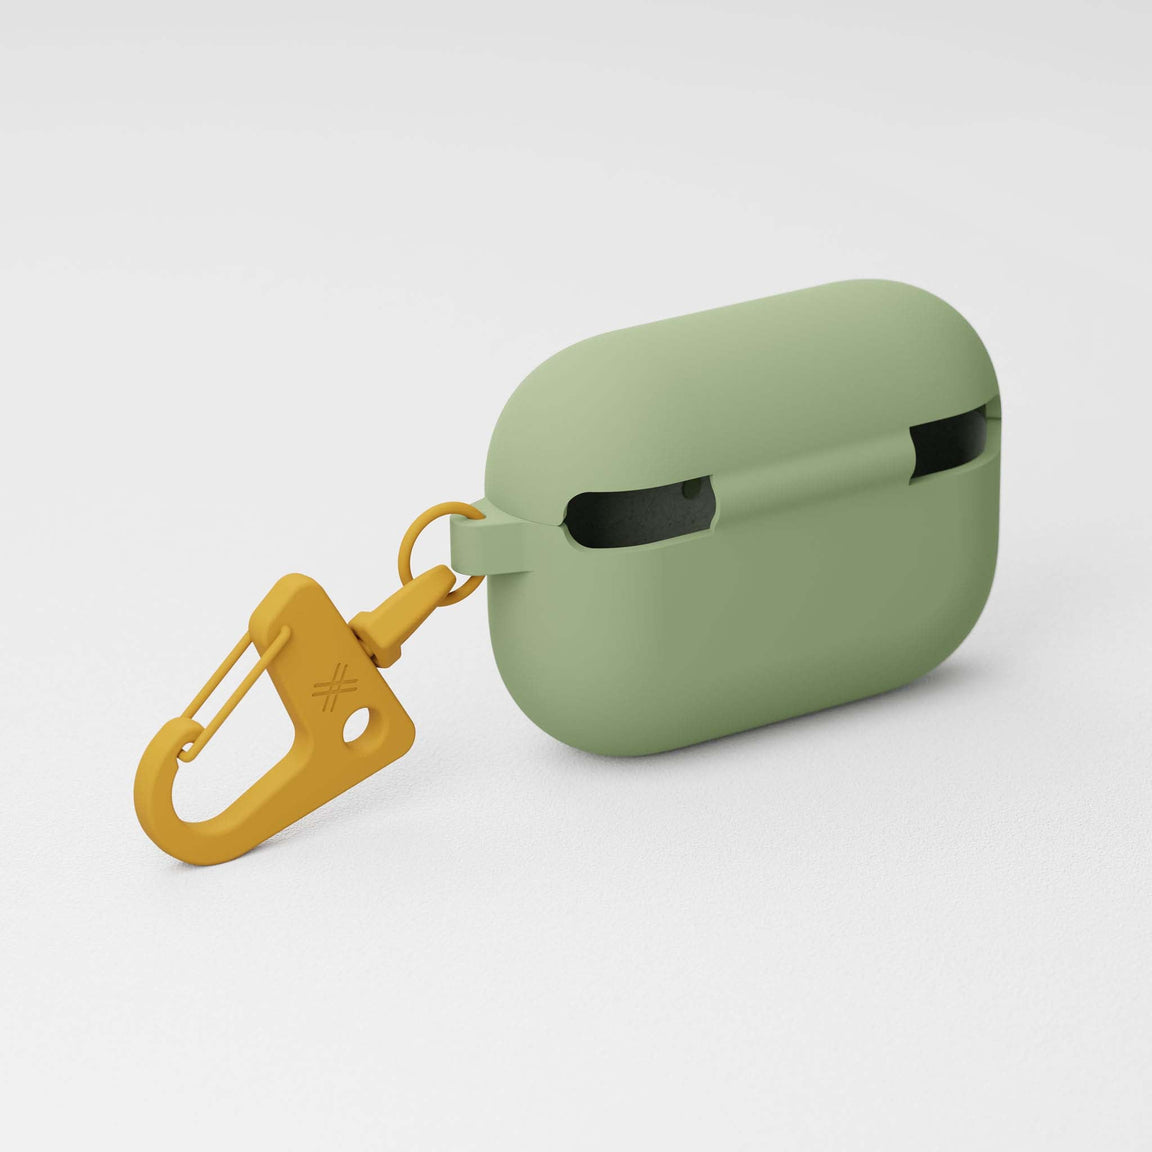 Apple AirPods Pro case in Olive Green silicone | XOUXOU